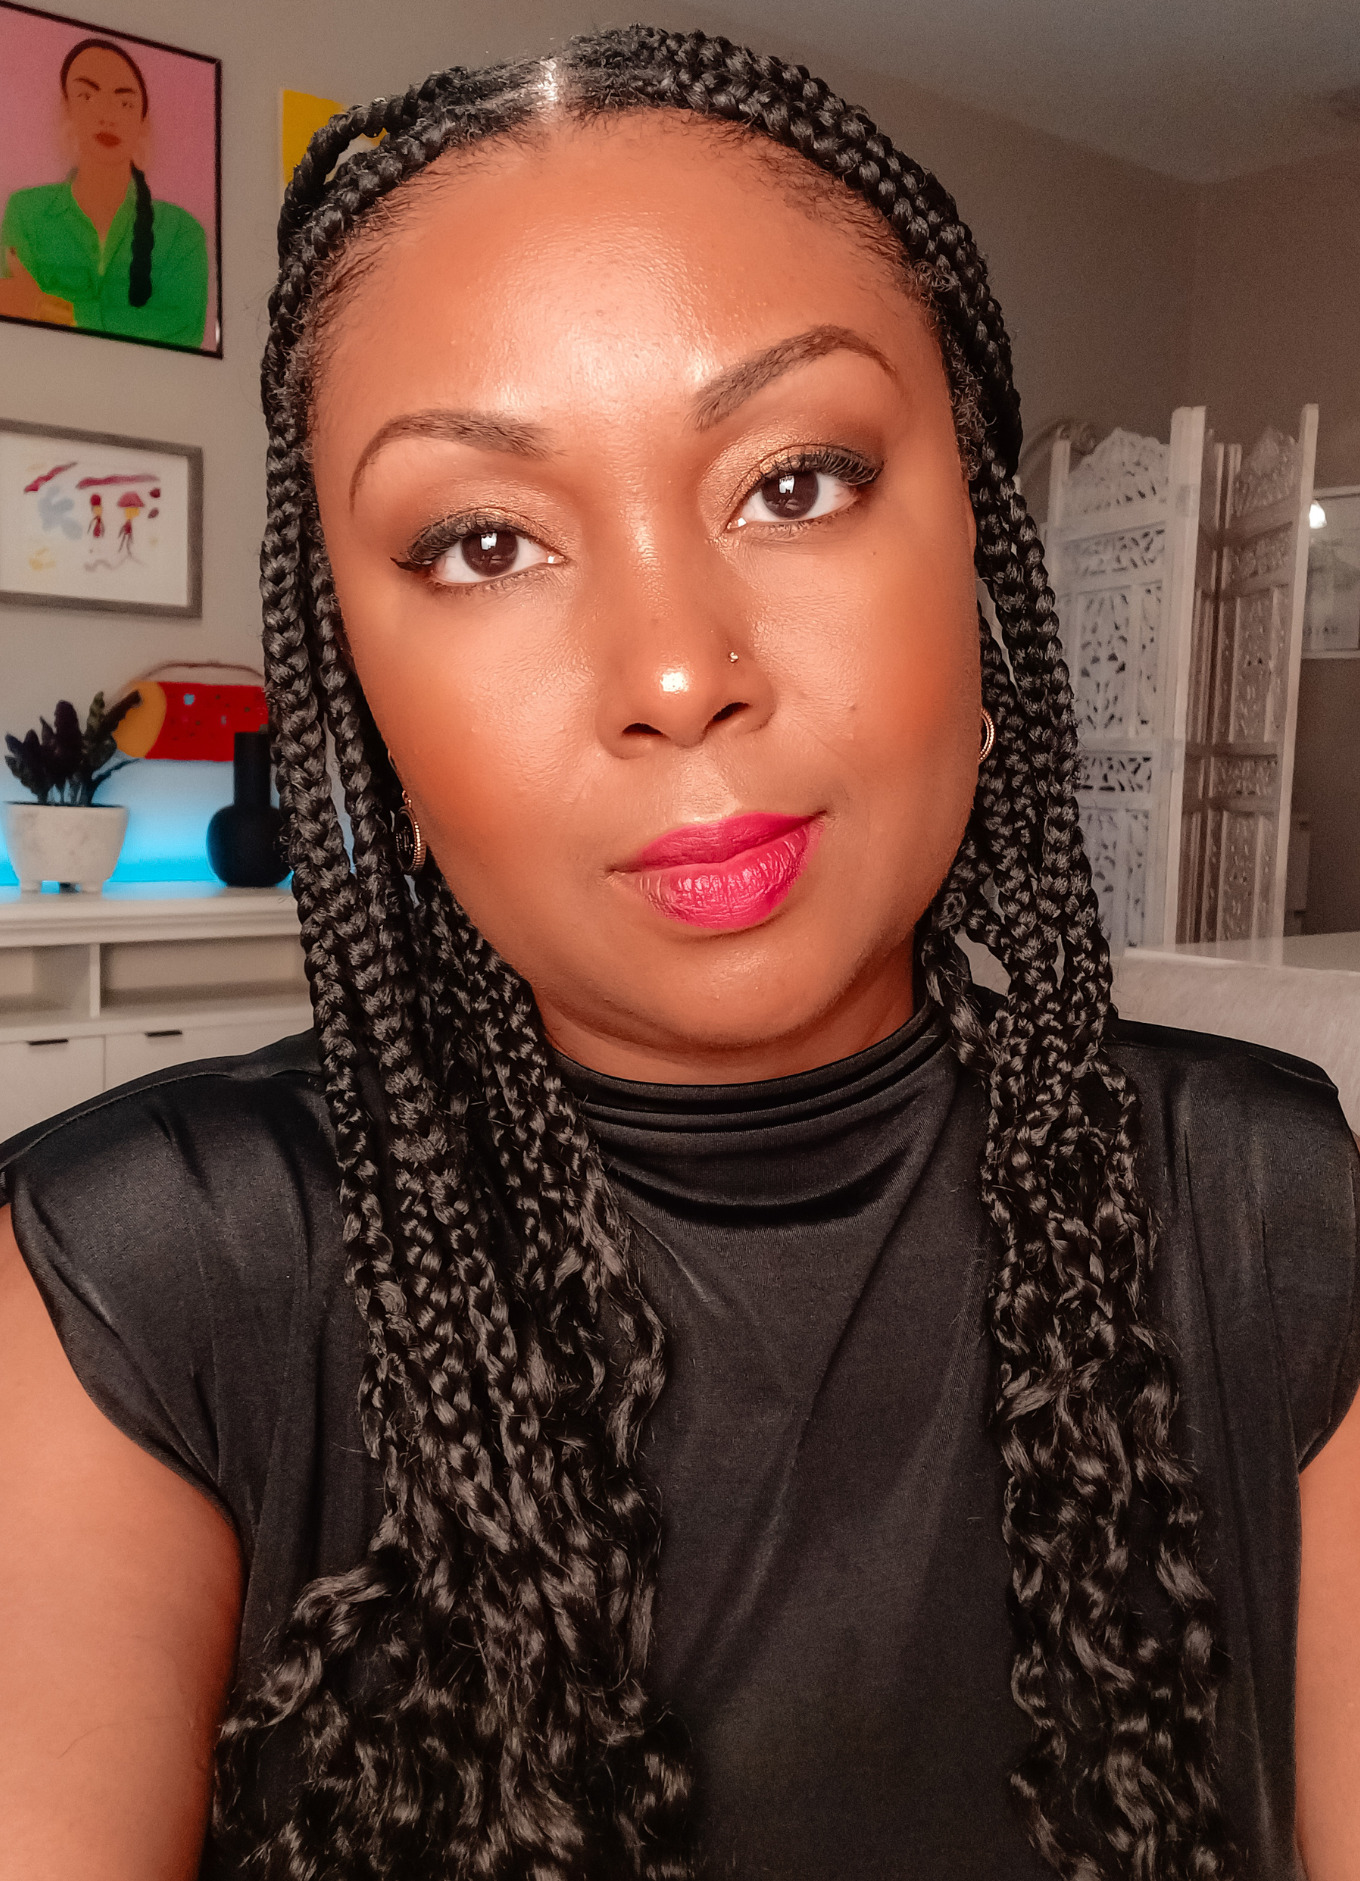 This Bahamian Gyal blogger, Rogan rejects being called cisgendered